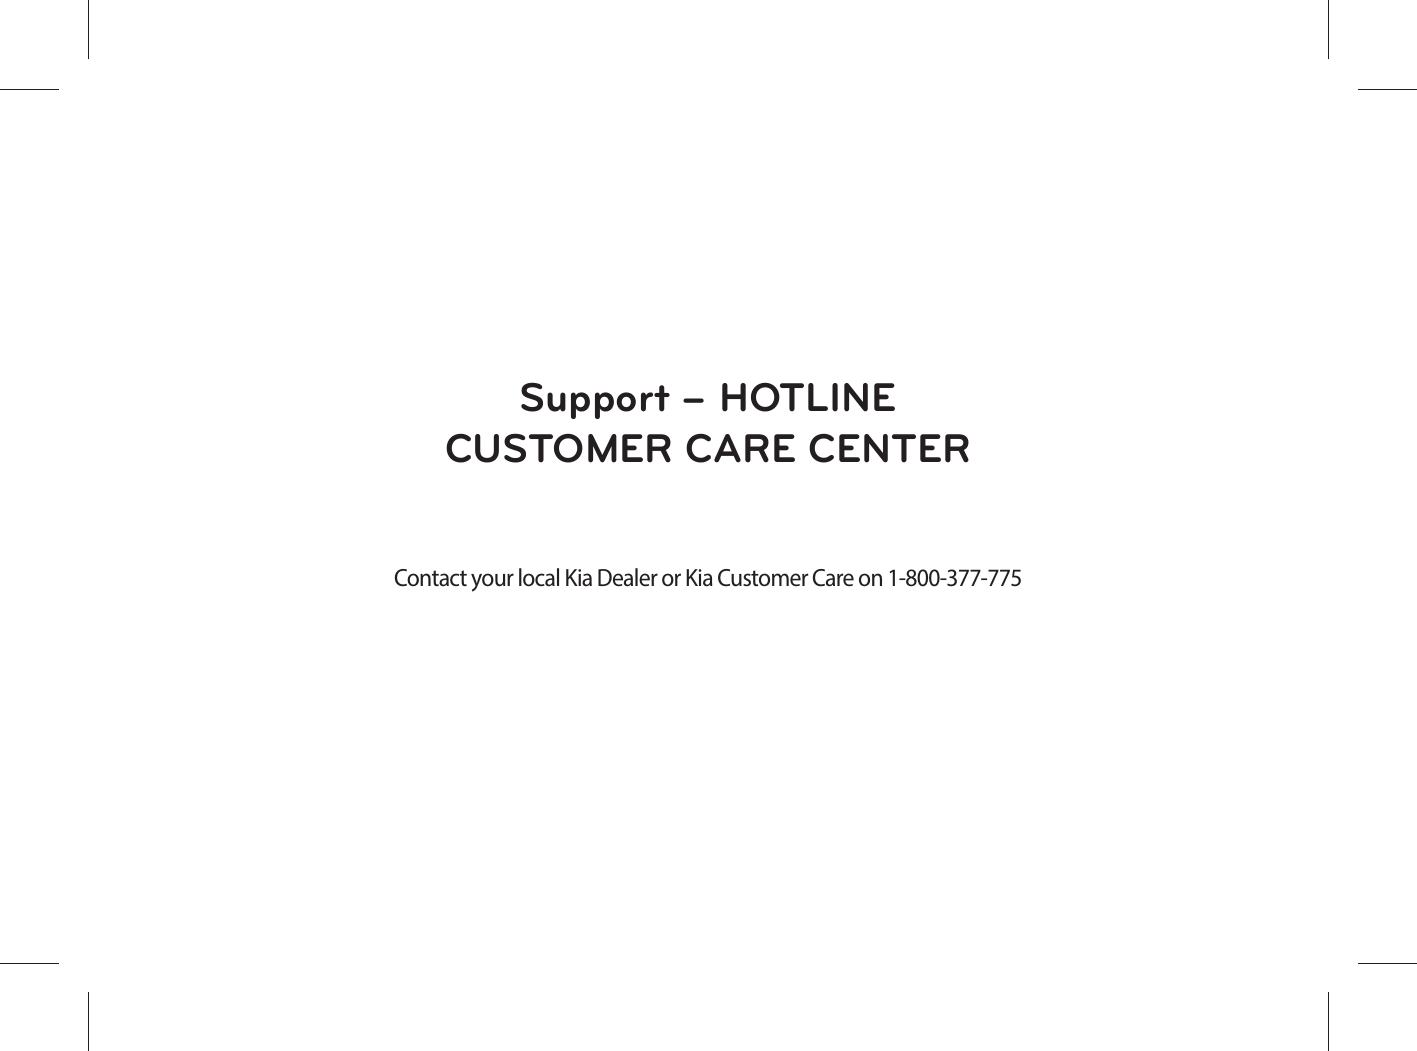 Support – HOTLINECUSTOMER CARE CENTERContact your local Kia Dealer or Kia Customer Care on 1-800-377-775